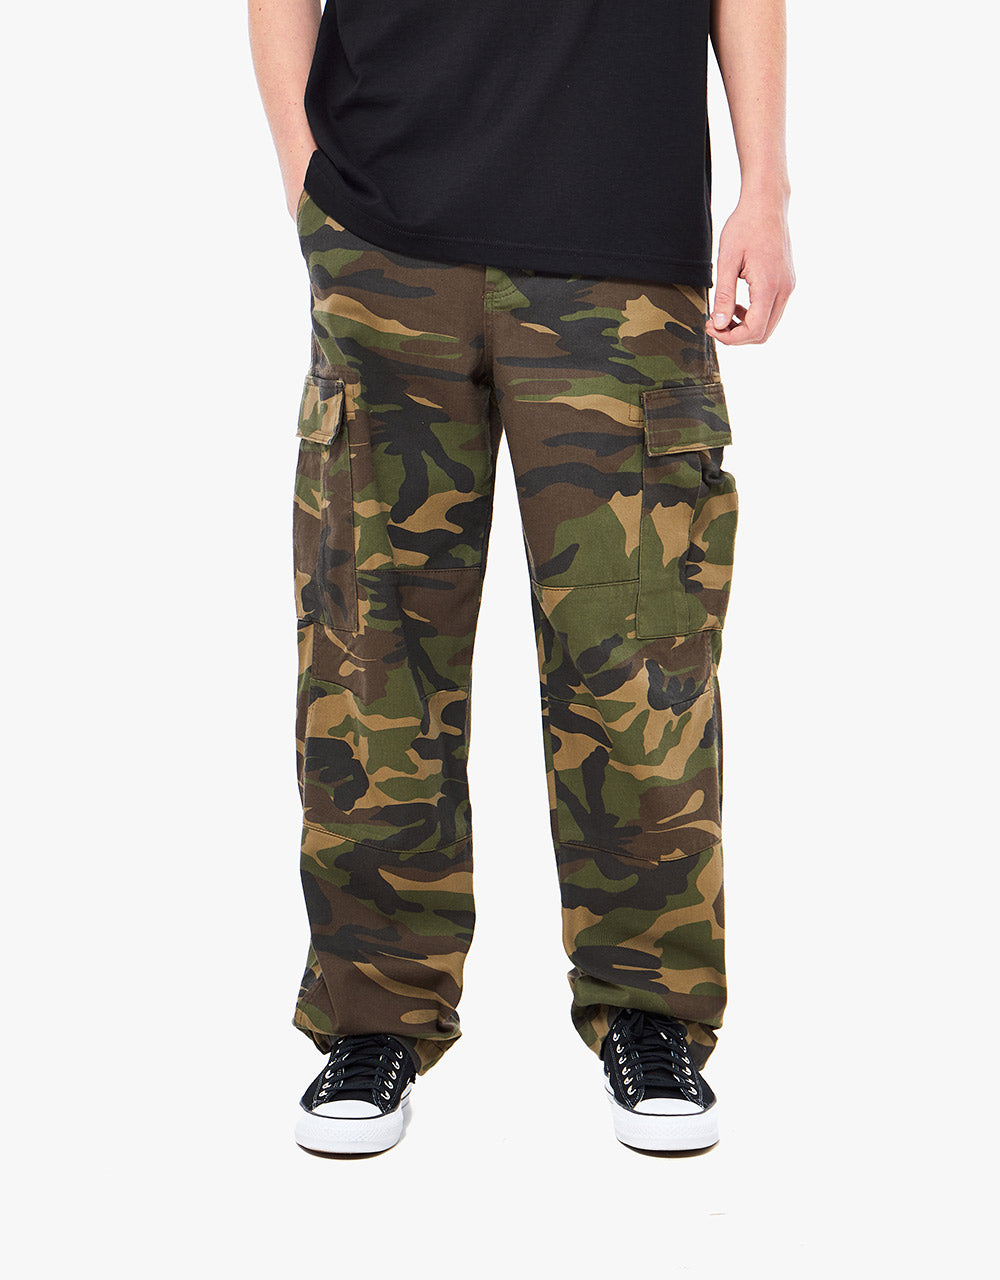 Route One Classic Cargo Pants - Camo